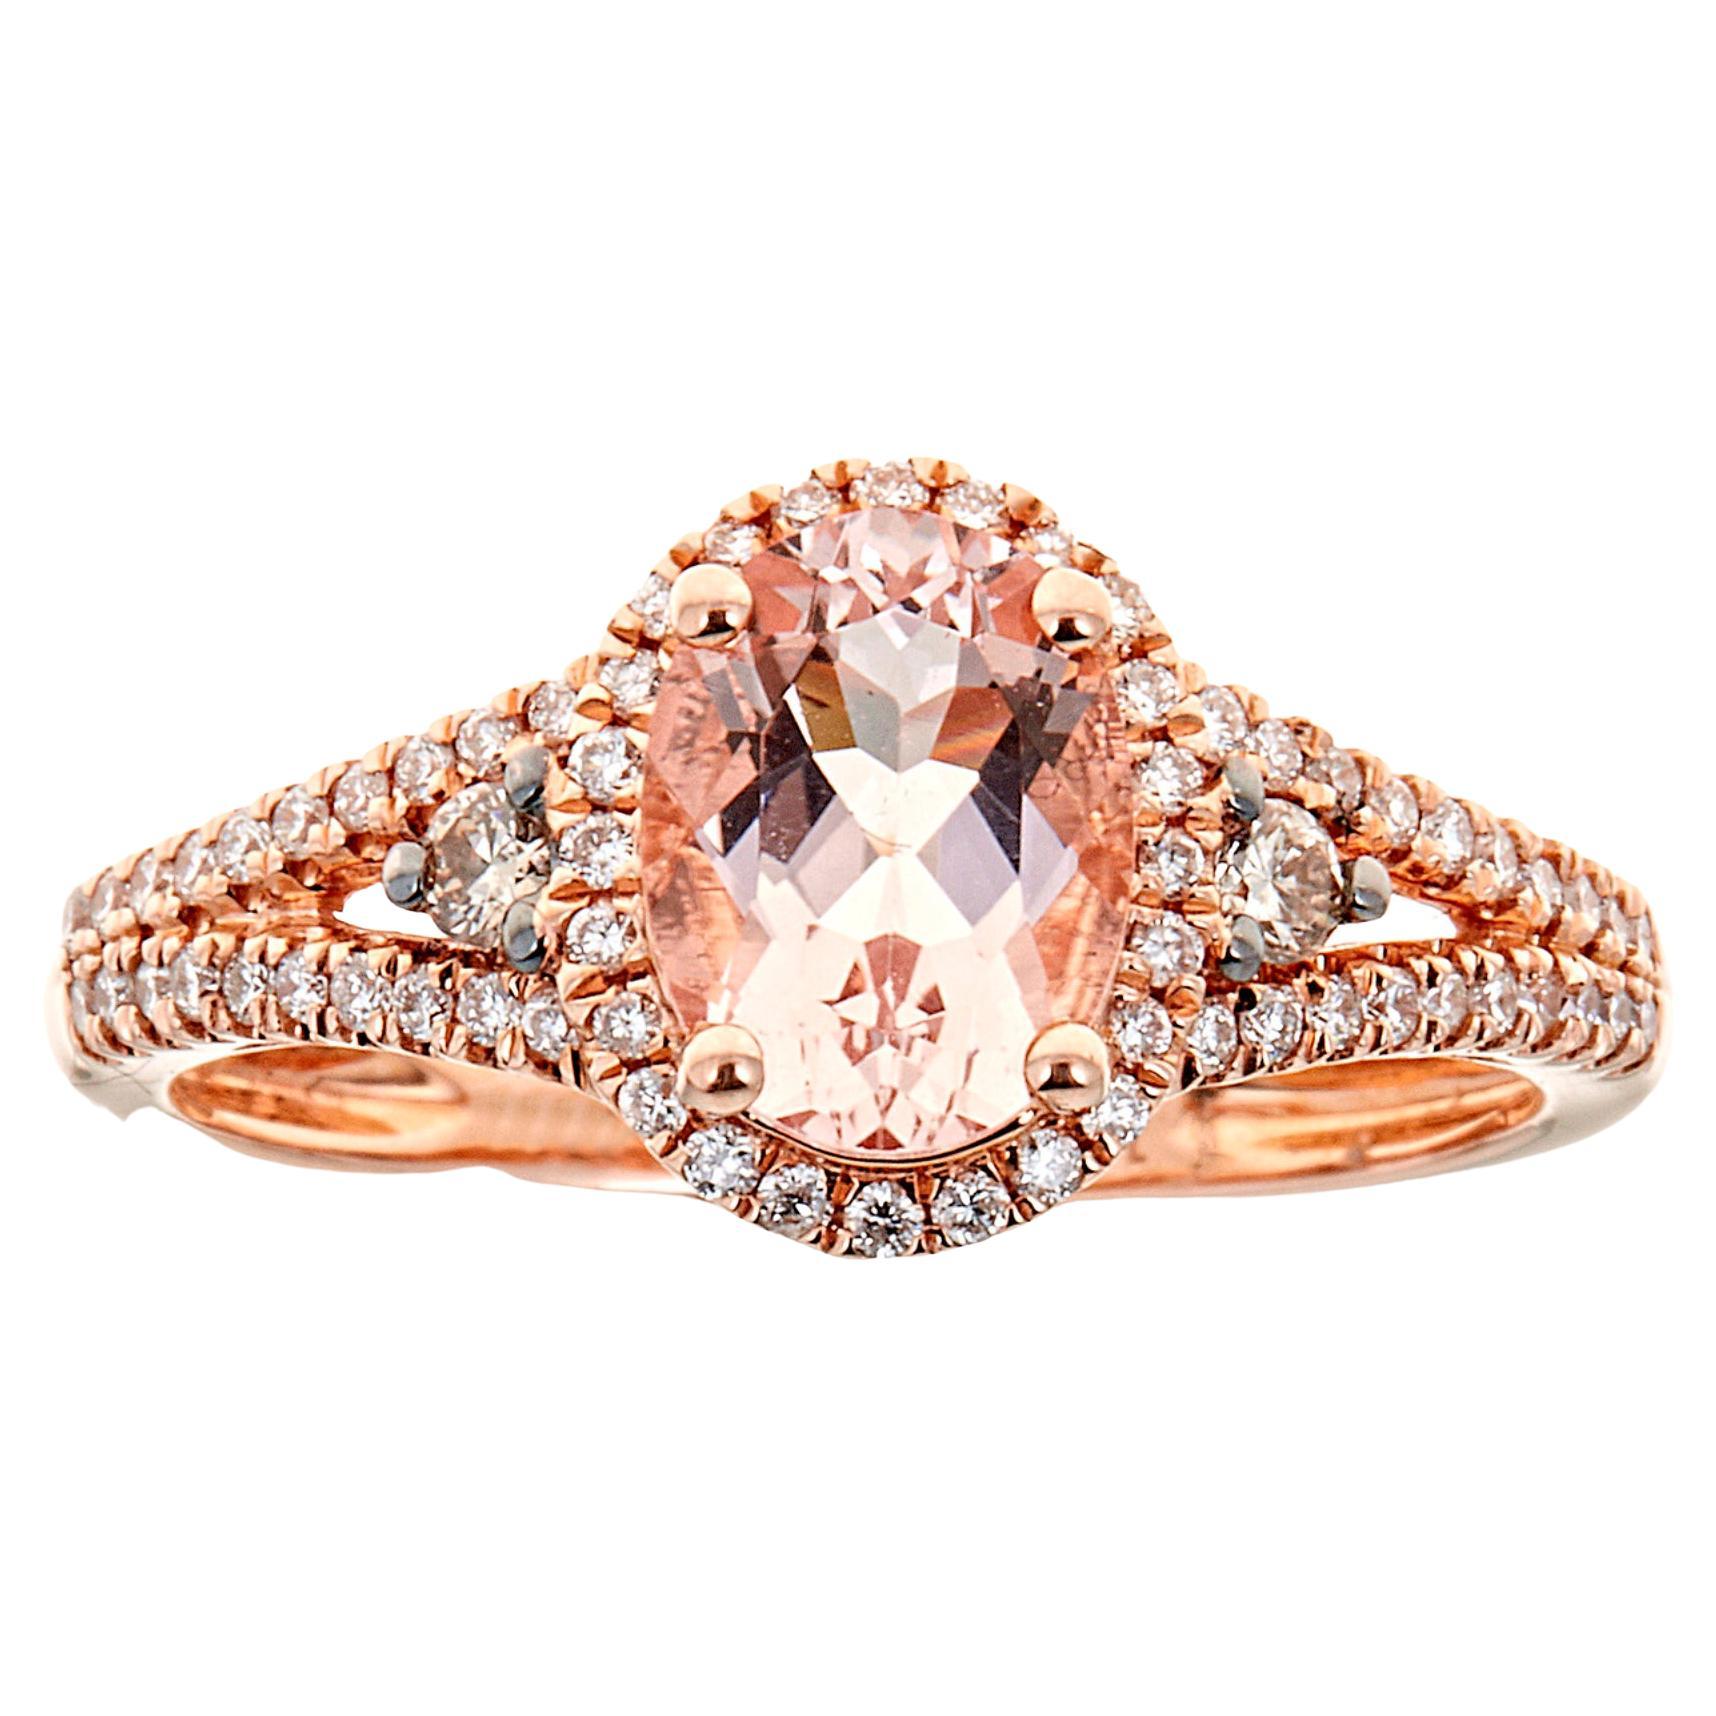 1.07 Carat Oval-Cut Morganite Diamond Accents 14K Rose Gold Ring For Sale